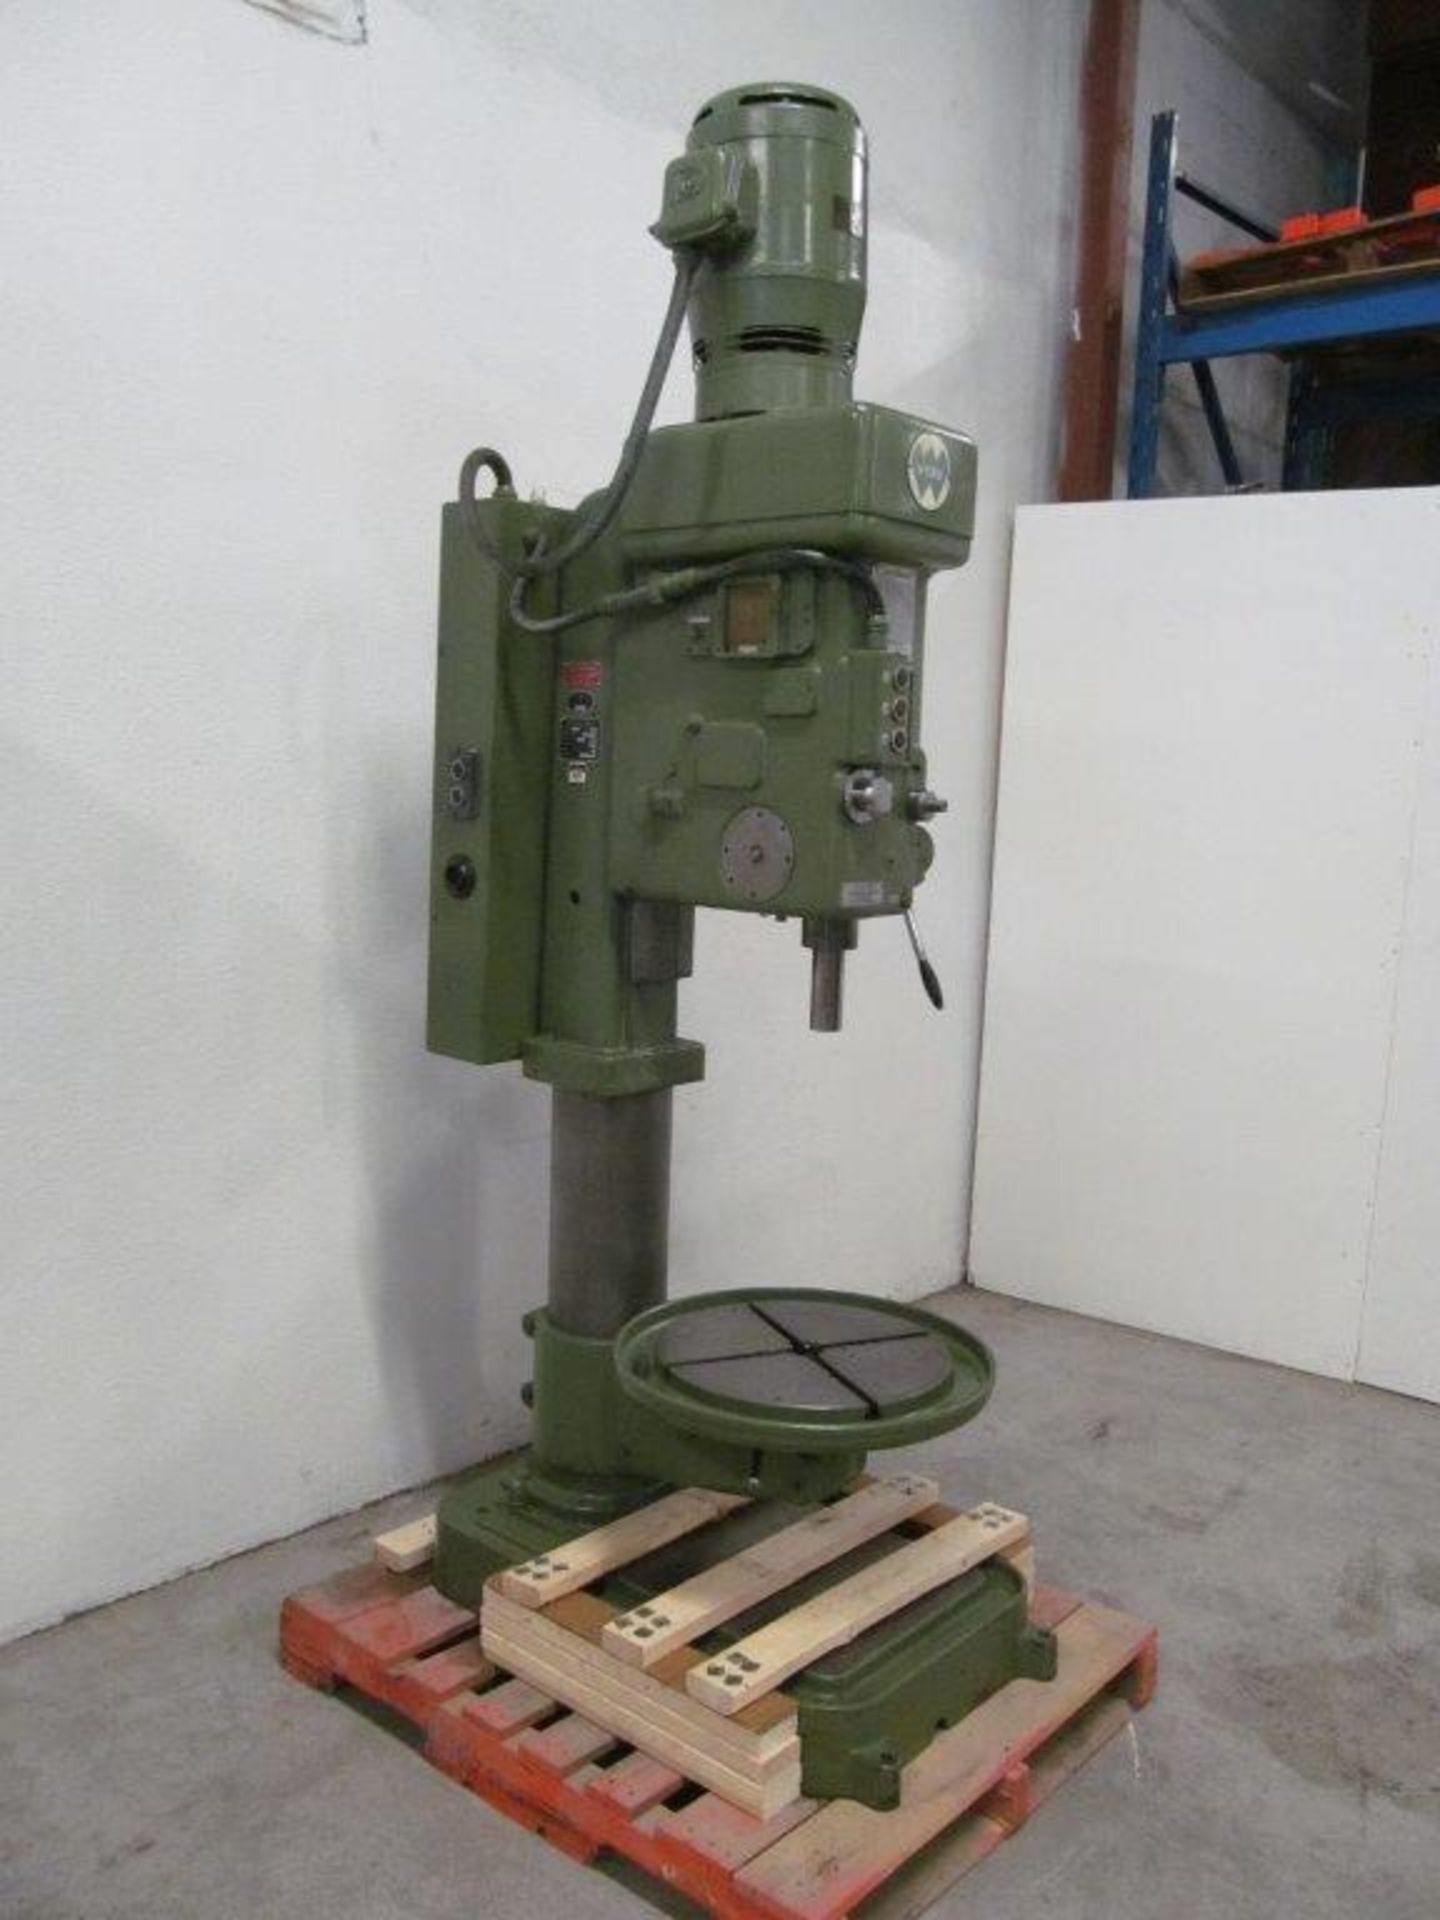 WEBO (GERMANY) HEAVY DUTY GEARED HEAD DRILL PRESS MT4 SPINDLE 1 9/16'' DRILLING CAPACITY, ELECTRICS: